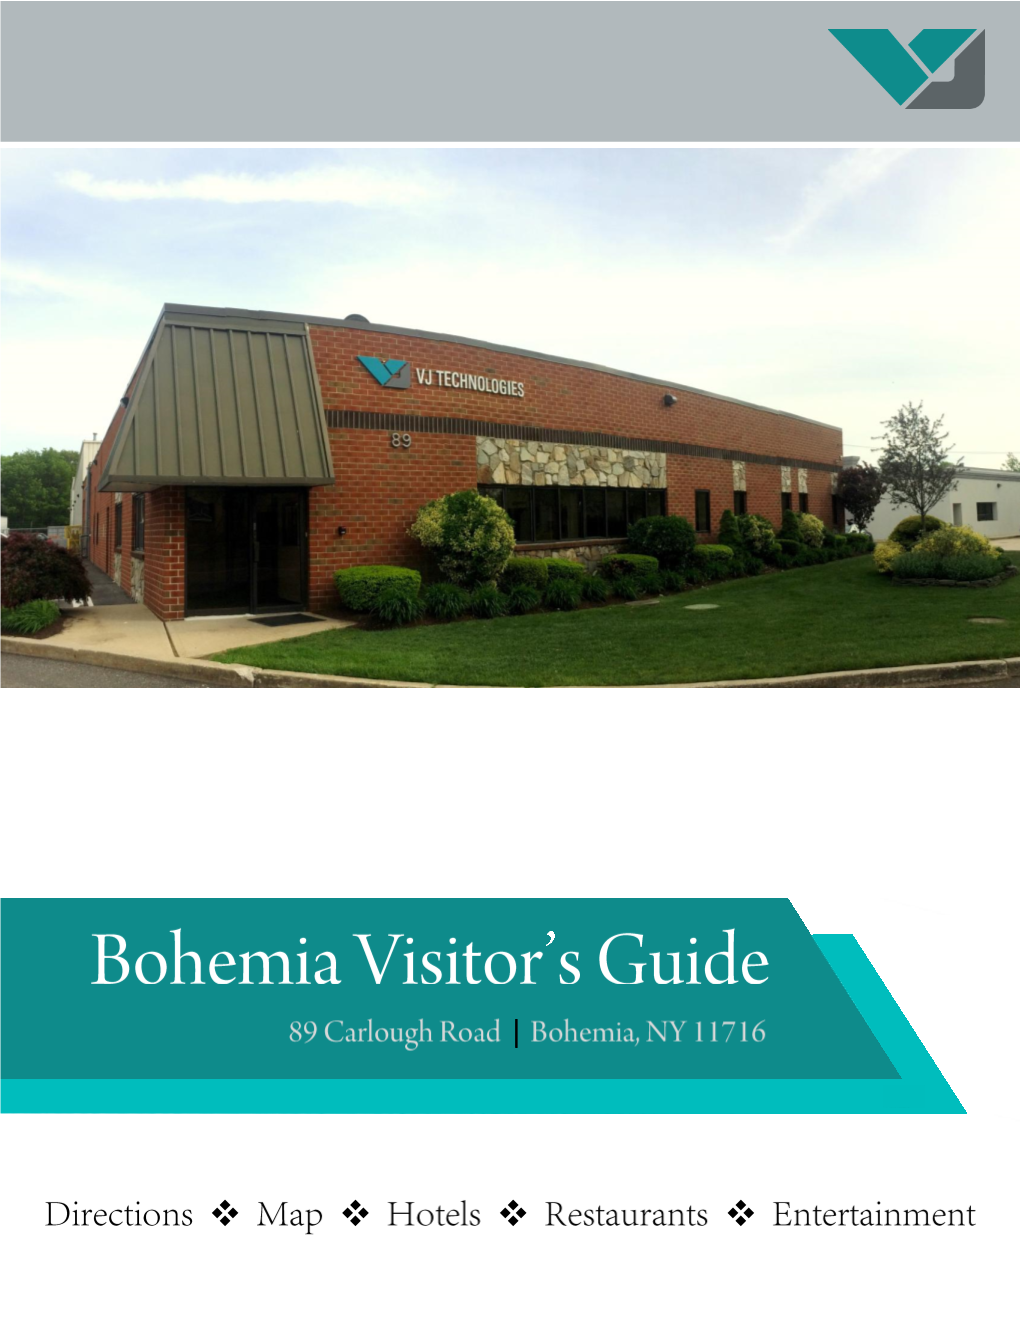 Download the Bohemia Visitor's Guide